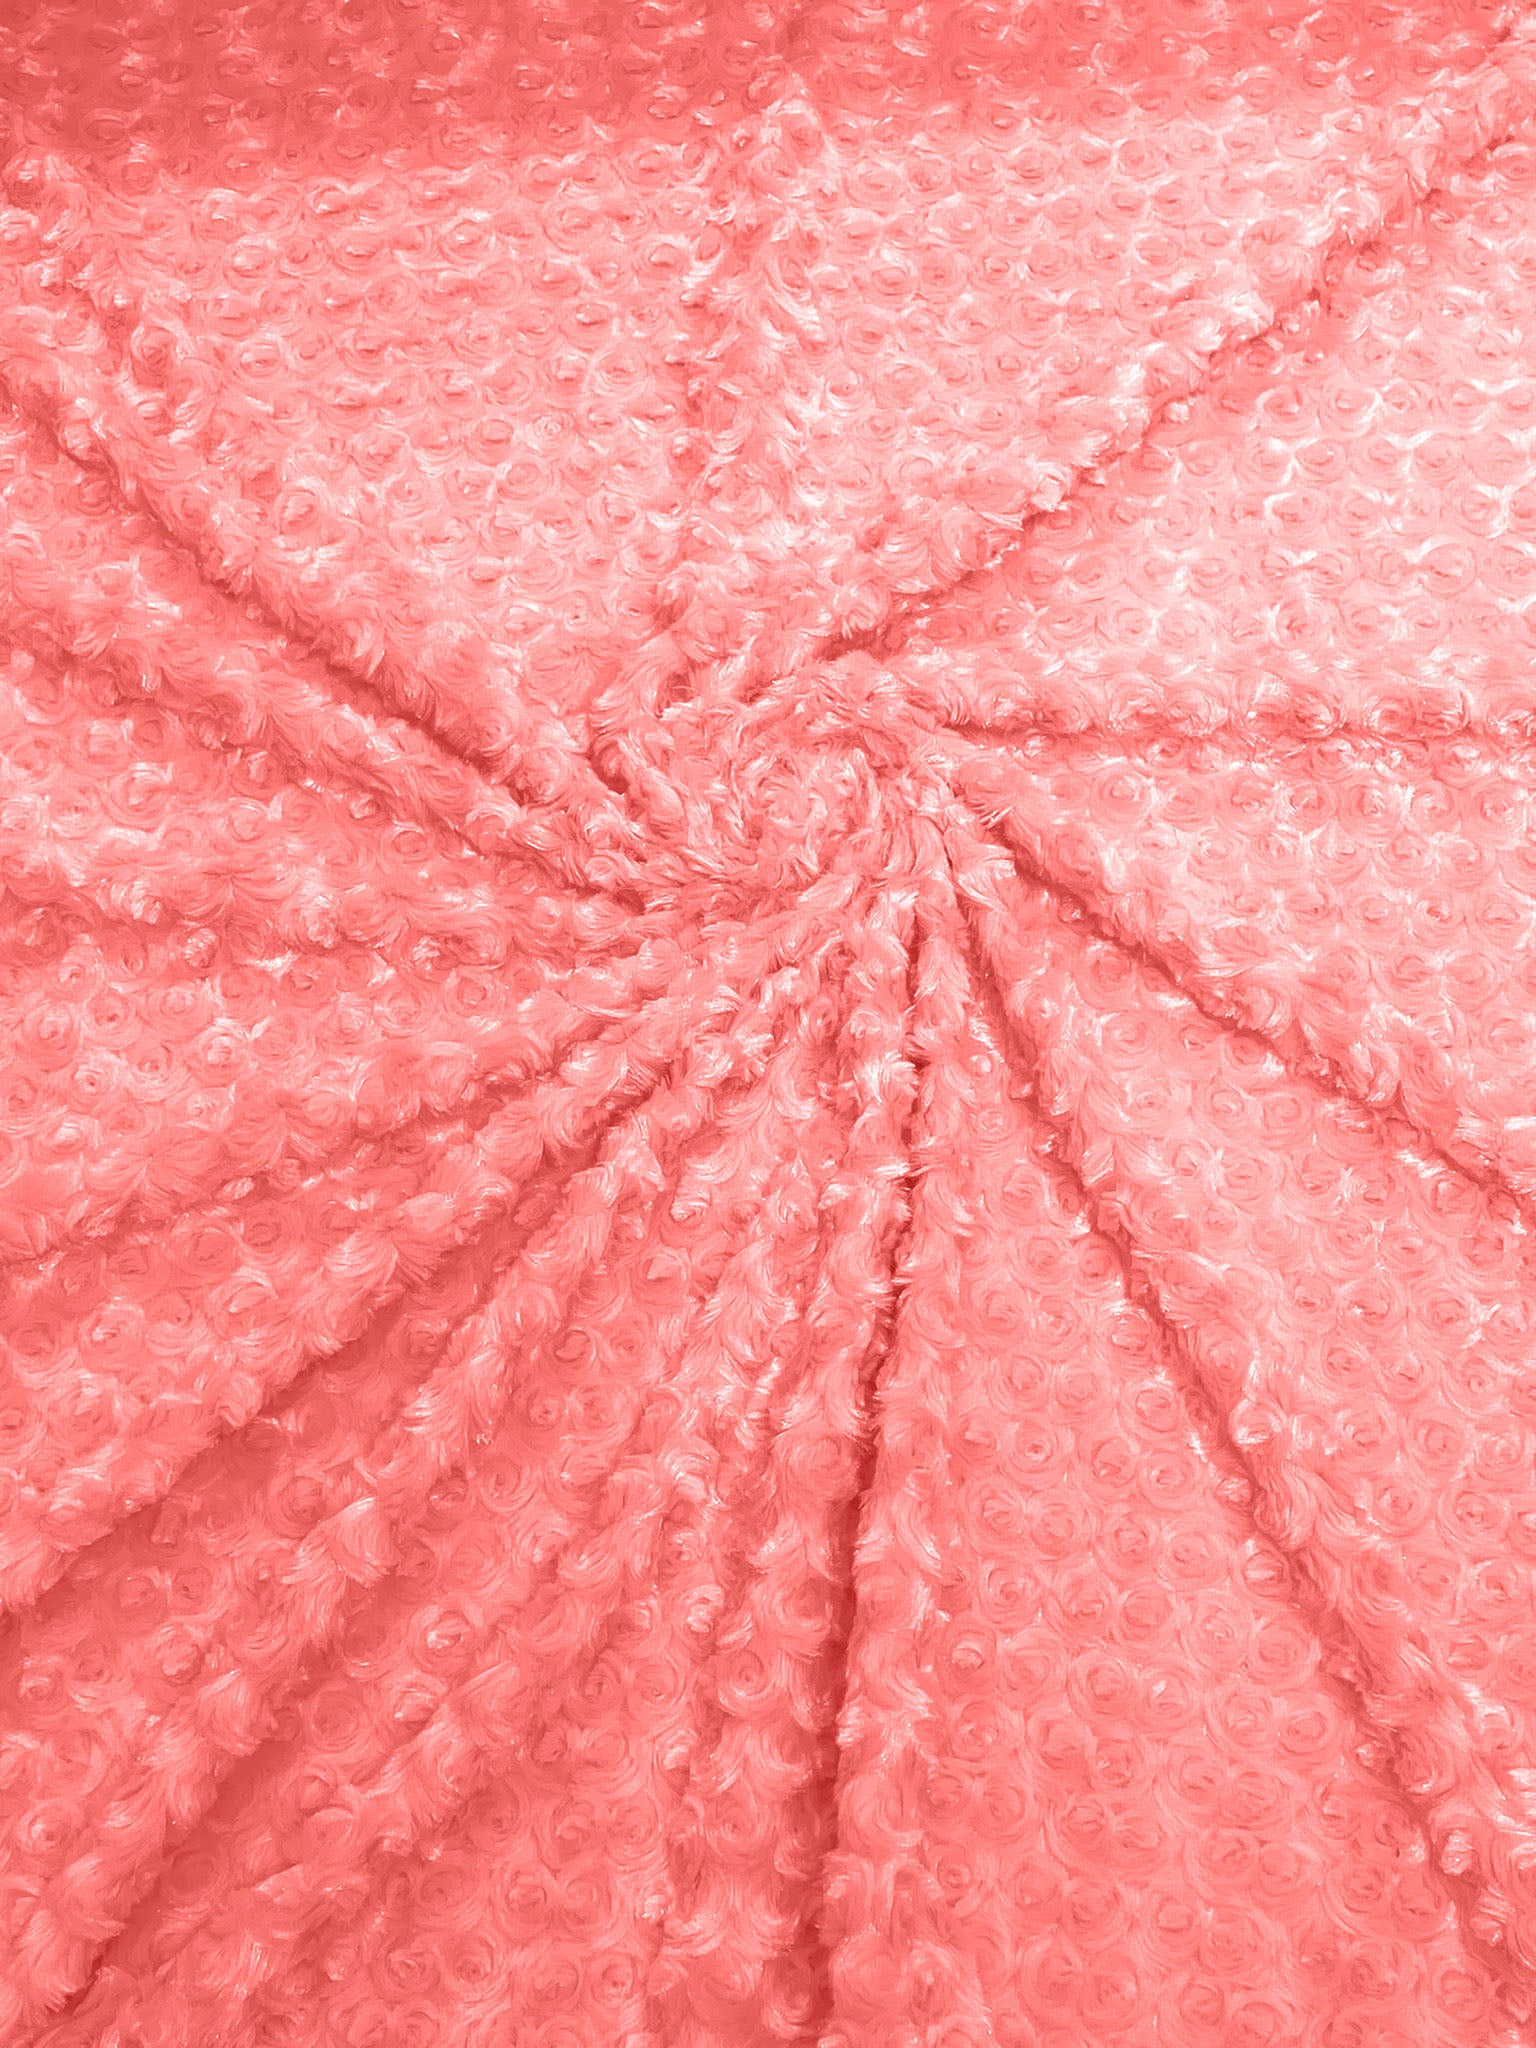 Coral - Minky Swirl Rose Blossom Ball Rosebud Plush Fur Fabric Polyester- 58" Wide Sold By The Yard